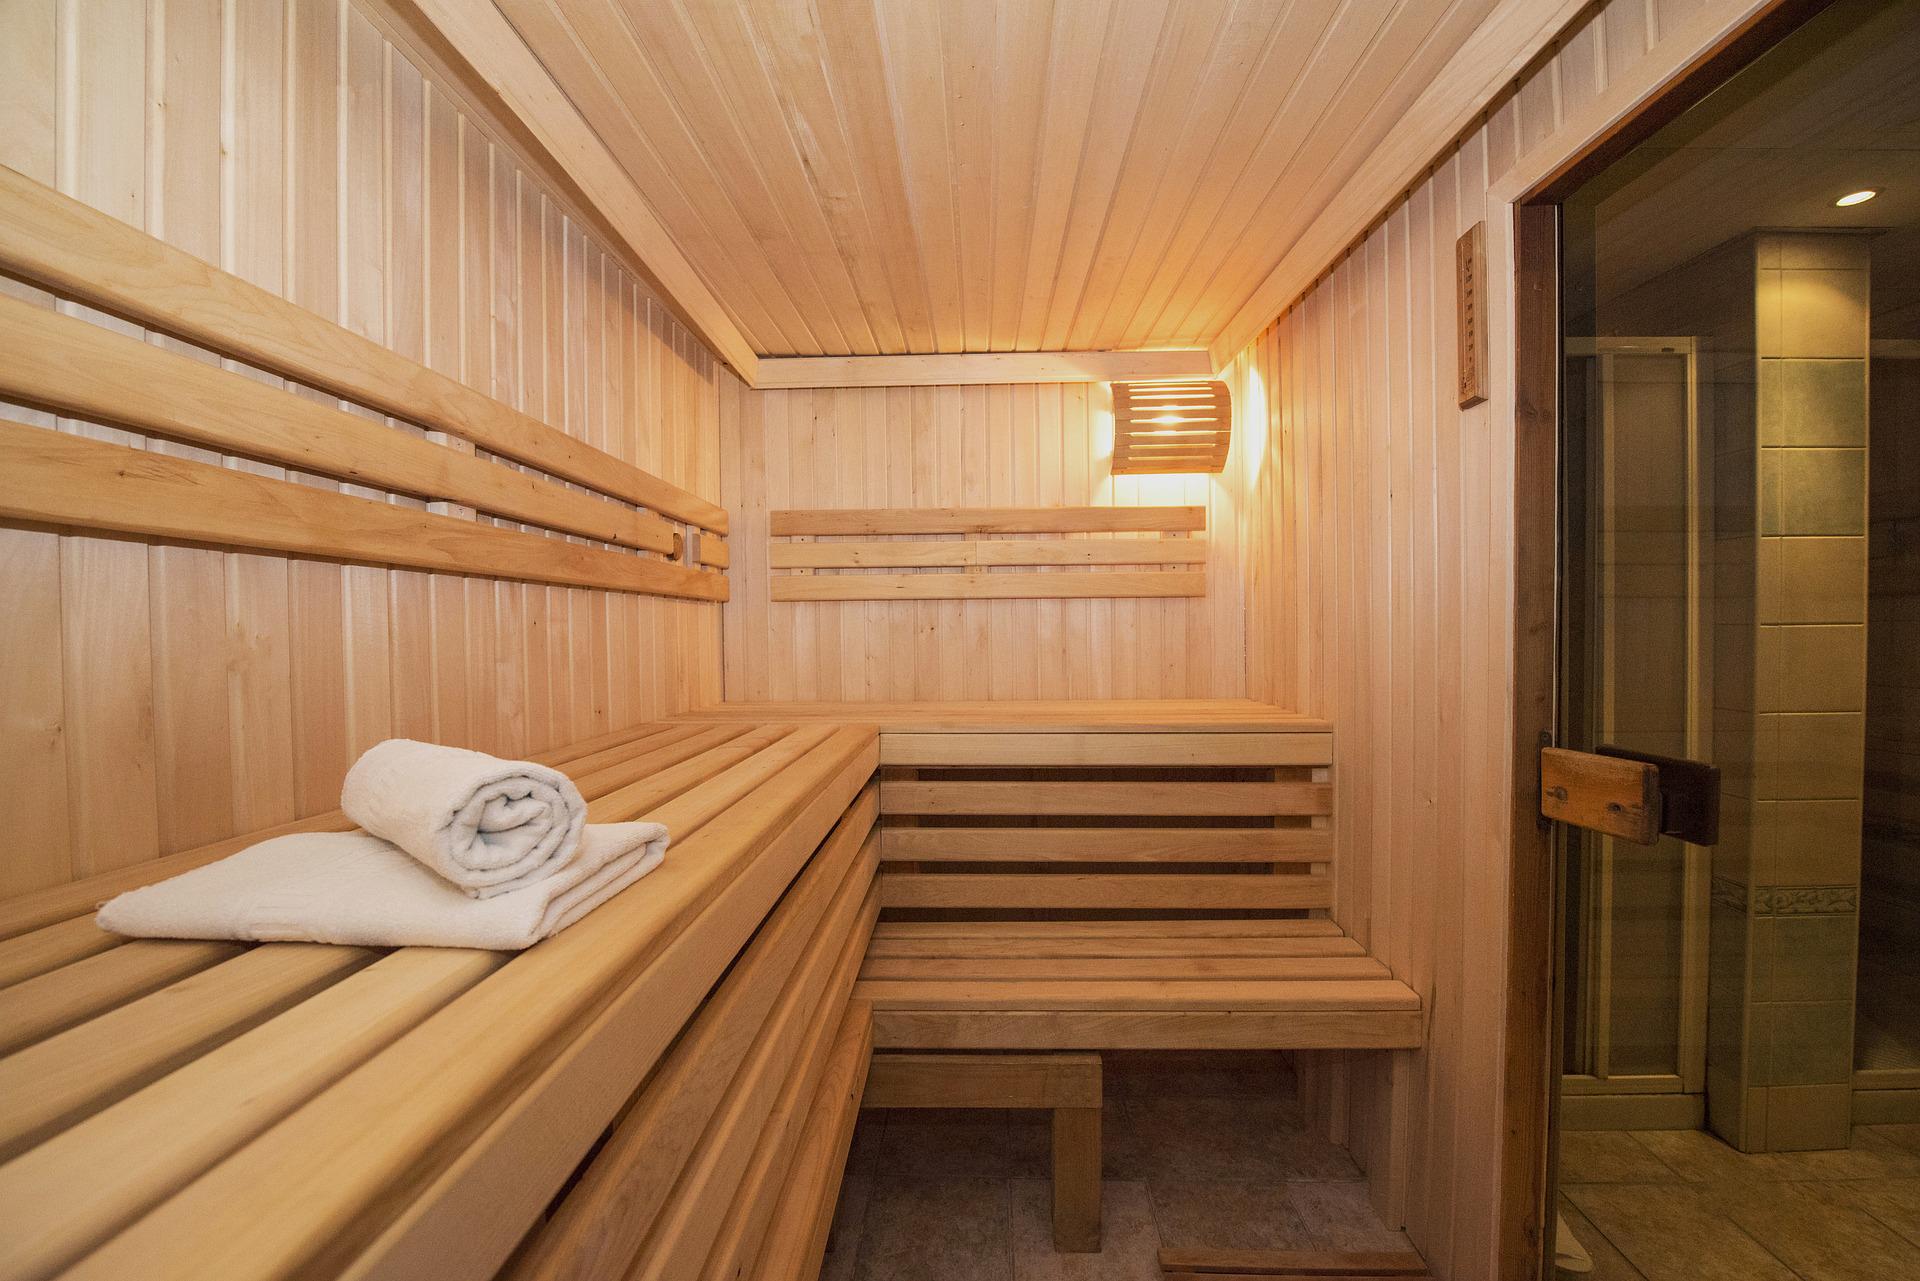 Can You Use an iPhone in a Sauna (Real Life Experience)